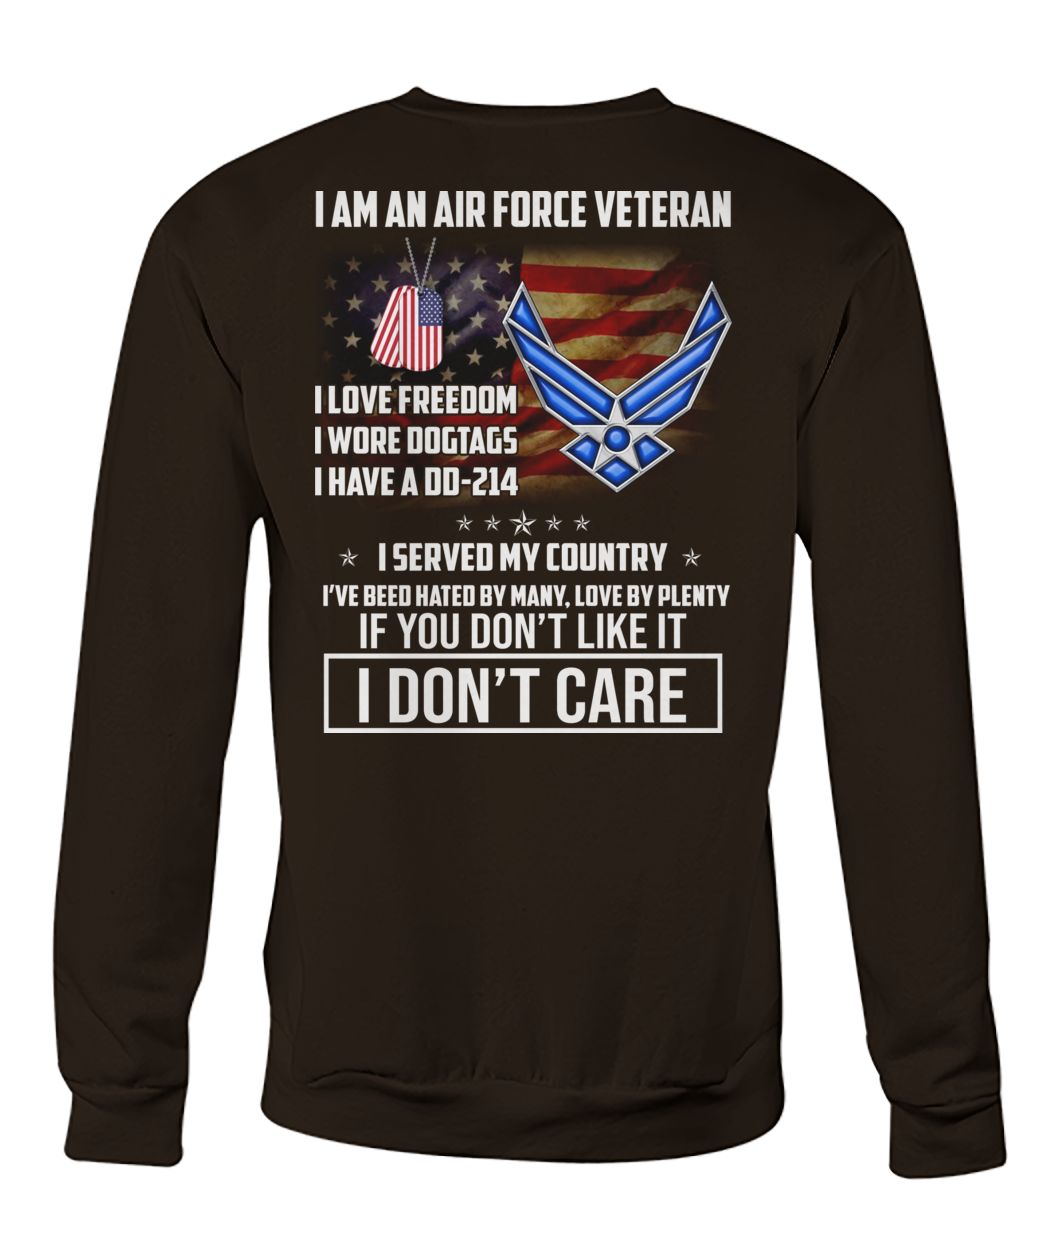 I am an air force veteran I love freedom I wore dogtags I have a DD-214 I served my country crew neck sweatshirt